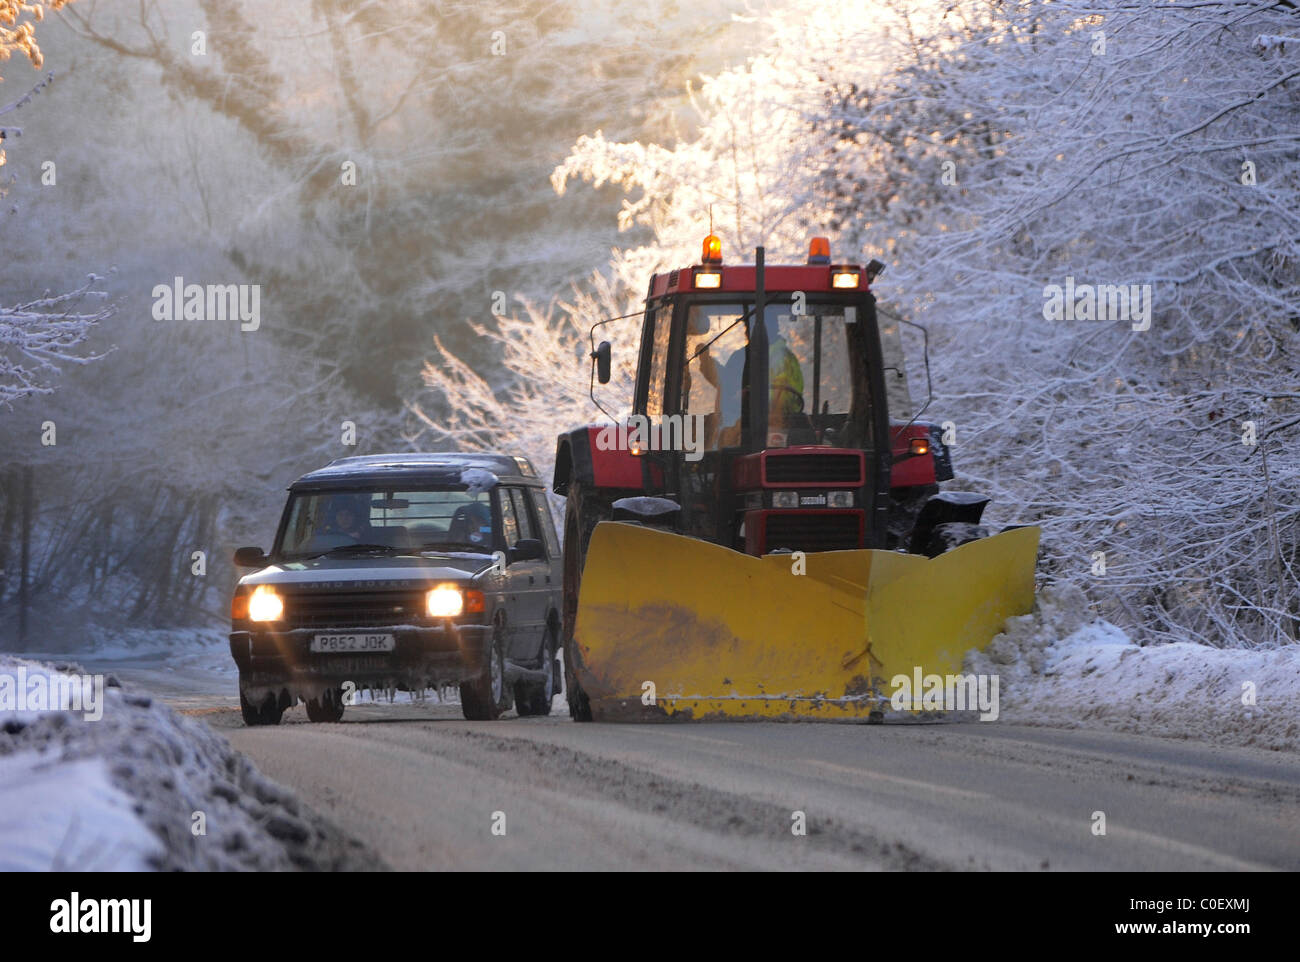 RANGE ROVER SNOW PLOUGH FORGE VALLEY SCARBOROUGH SCARBOROUGH NORTH YORKSHIRE FORGE VALLEY SCARBOROUGH 21 December 2010 Stock Photo